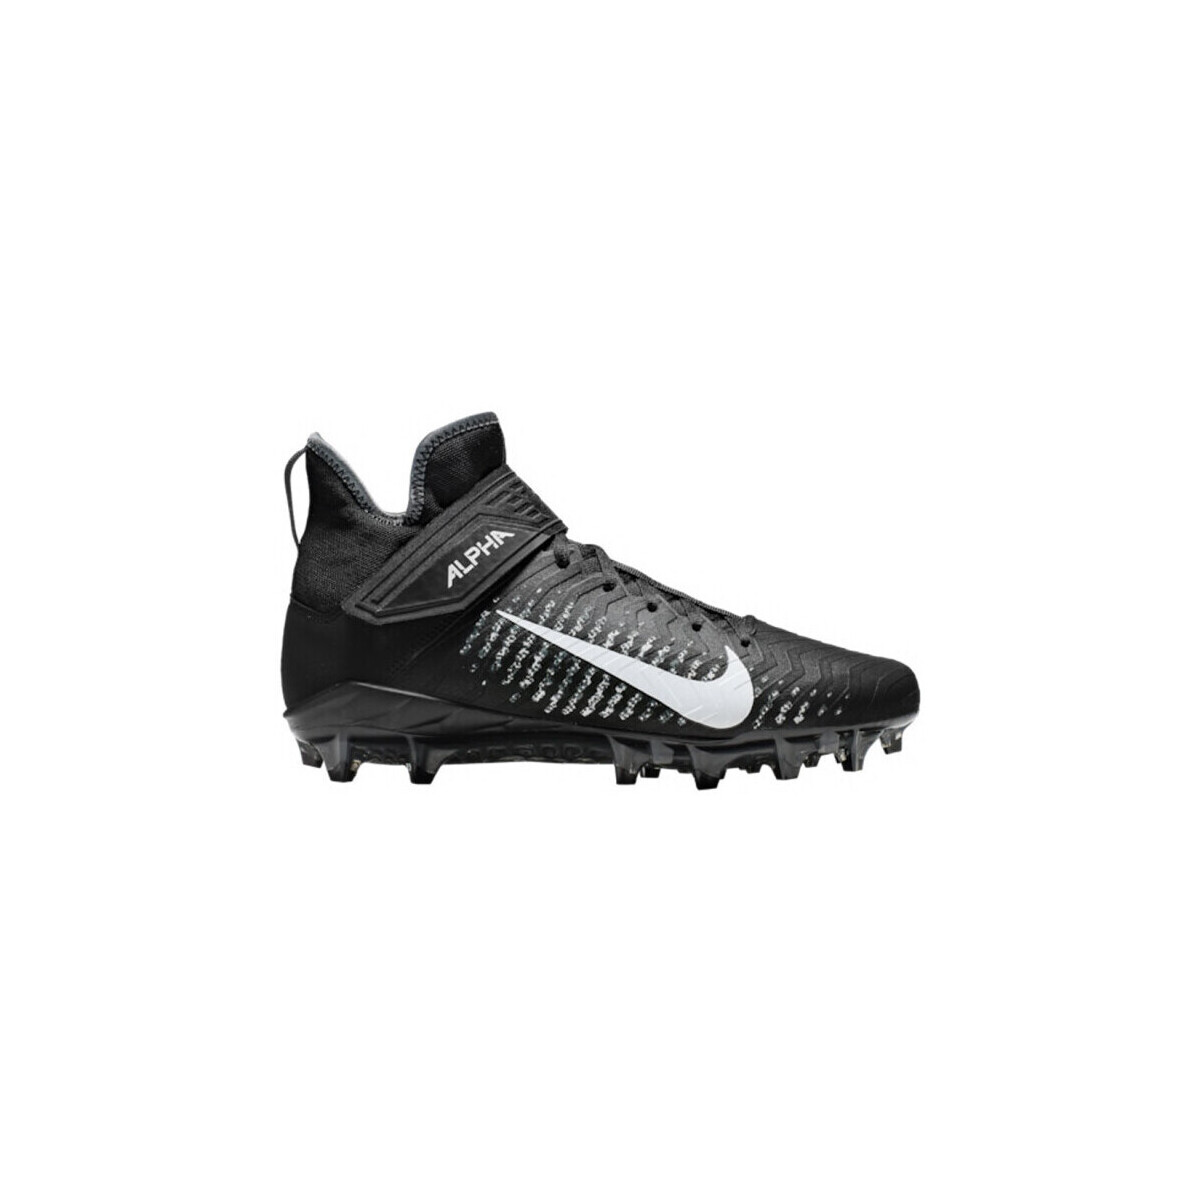 Chaussures Rugby Nike Crampons de Football Americain Multicolore